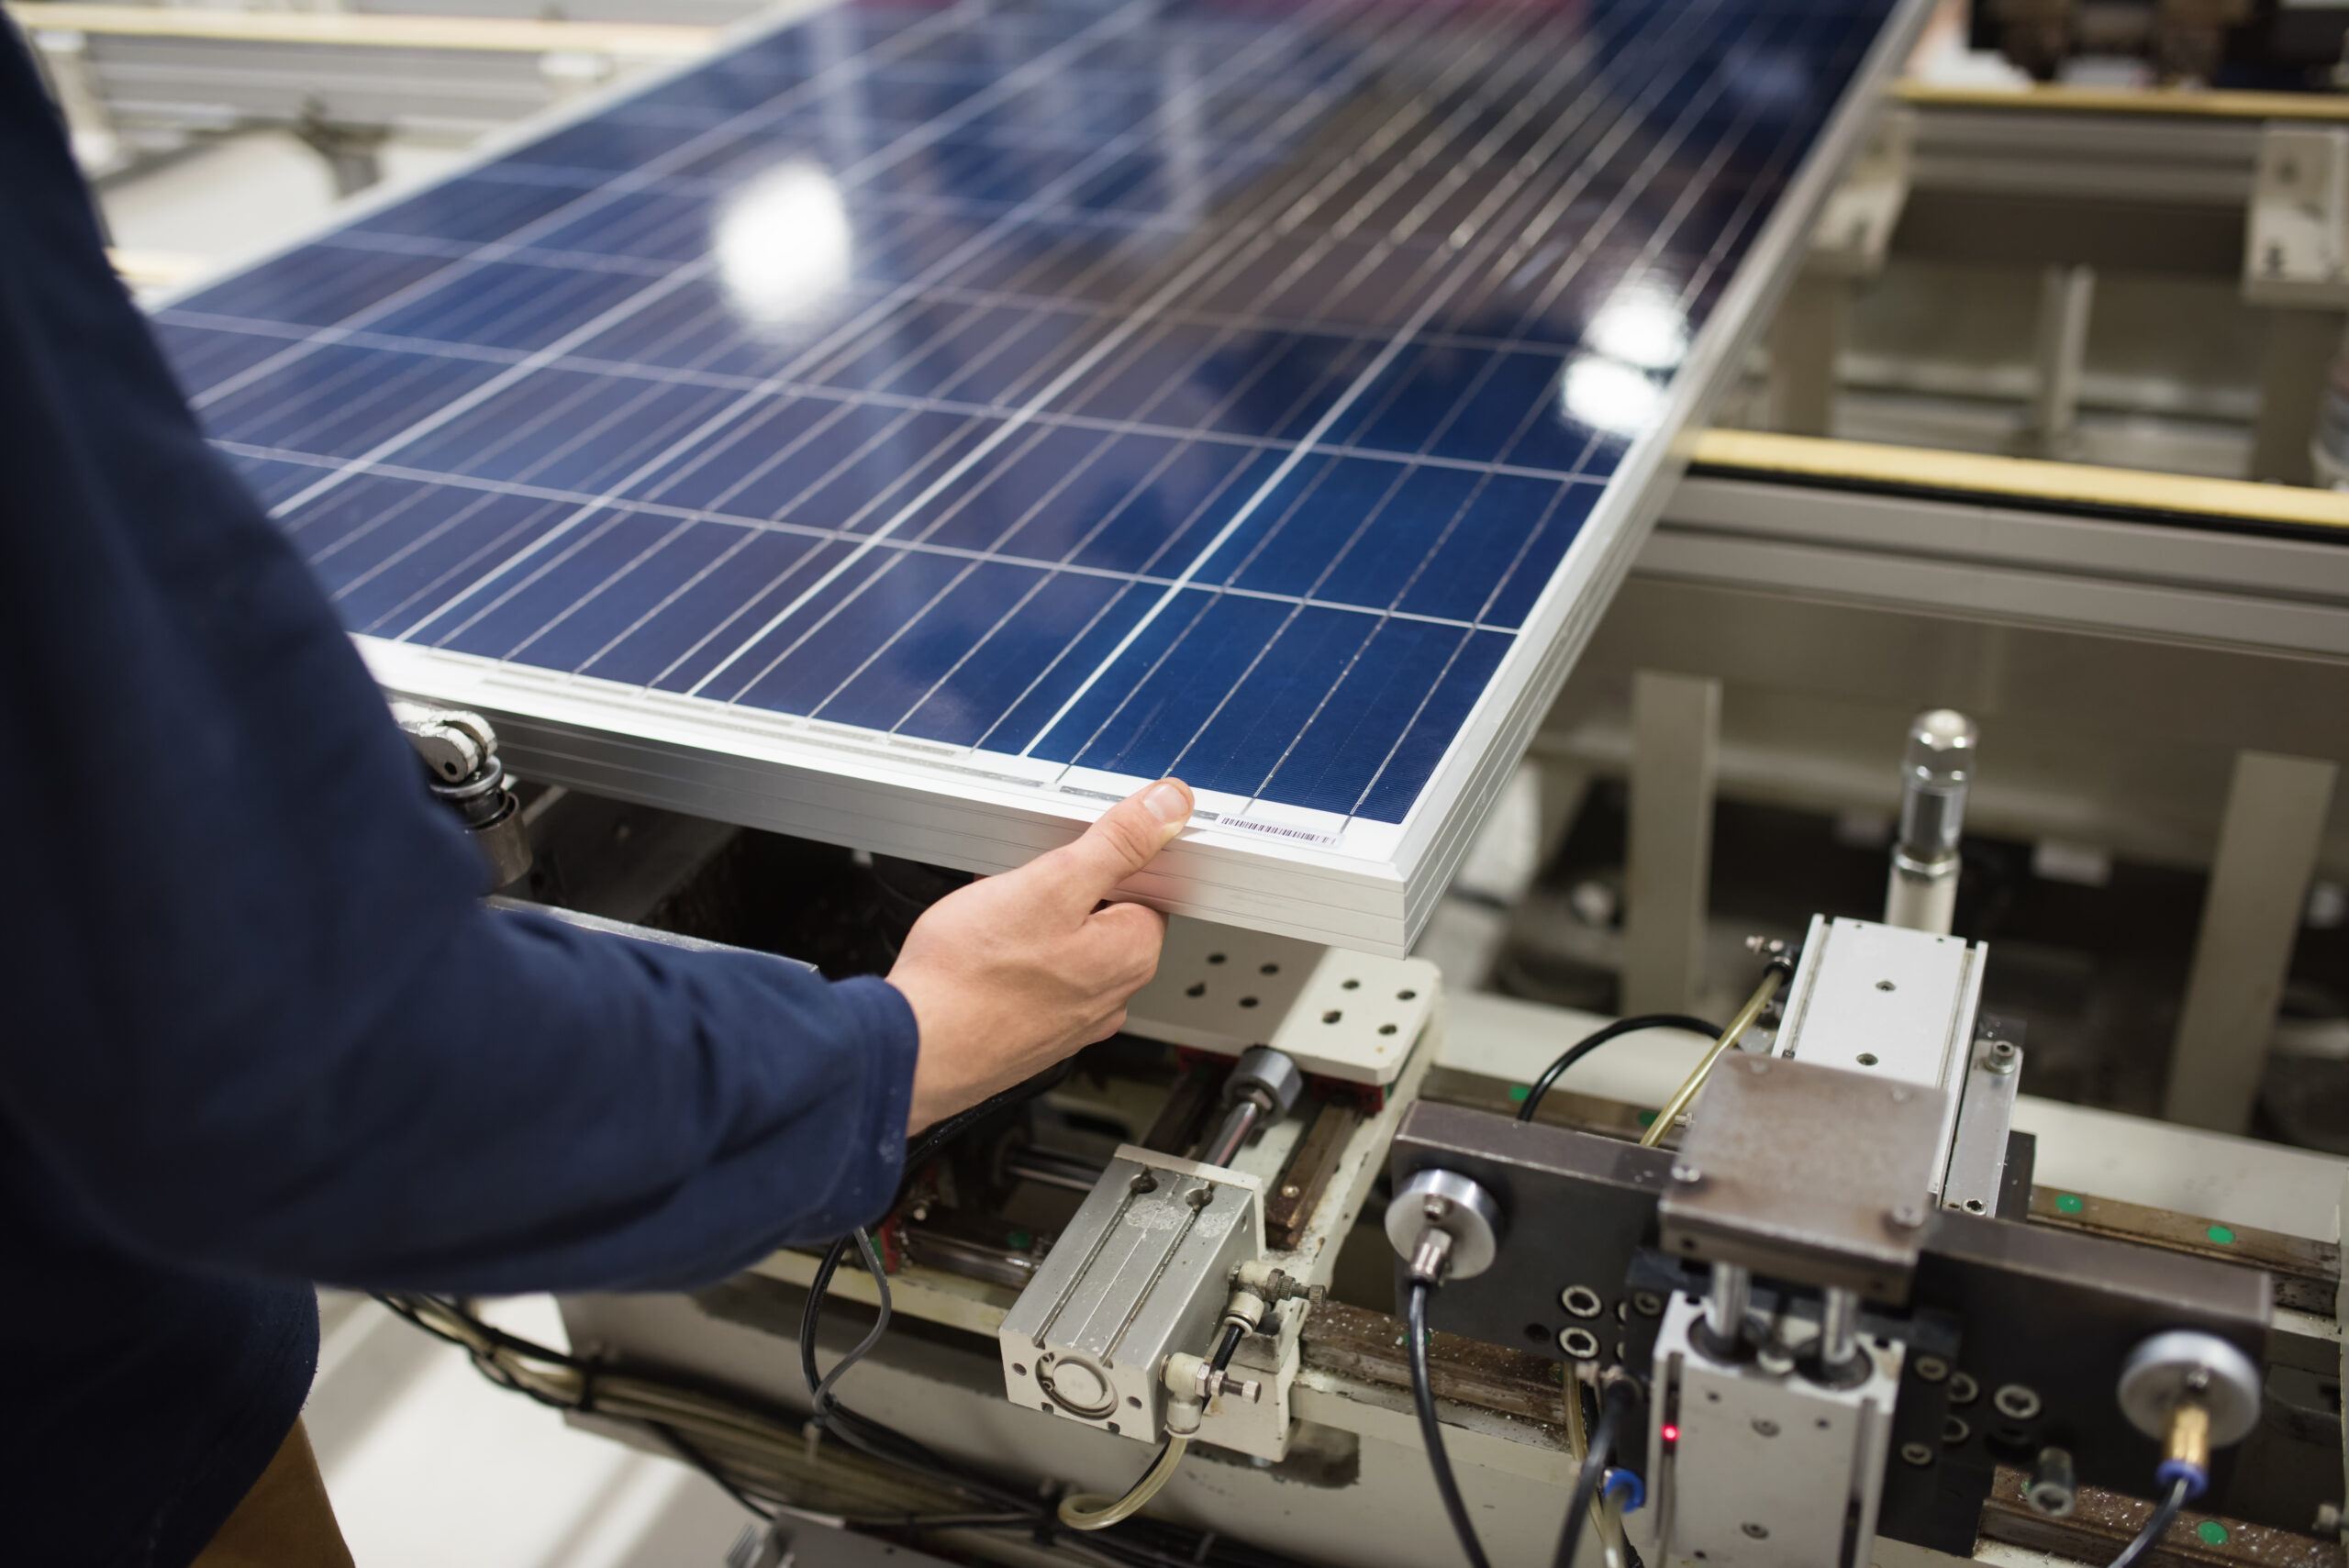 Major U.S. Solar Panel Manufacturer to Invest $1.2B in New Factory